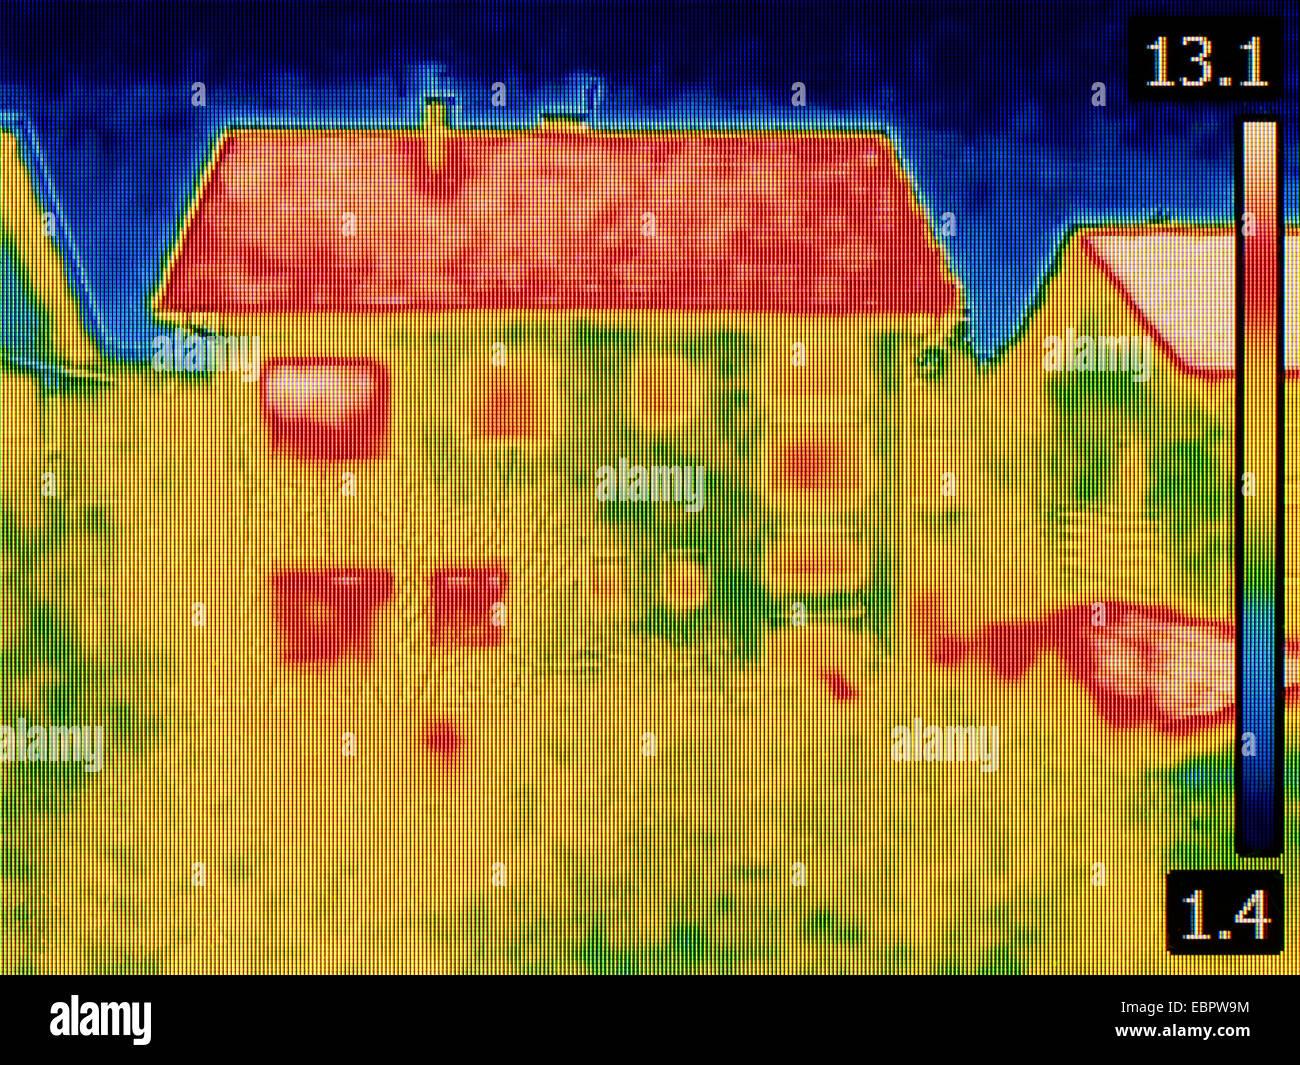 Thermal Image of the House Stock Photo